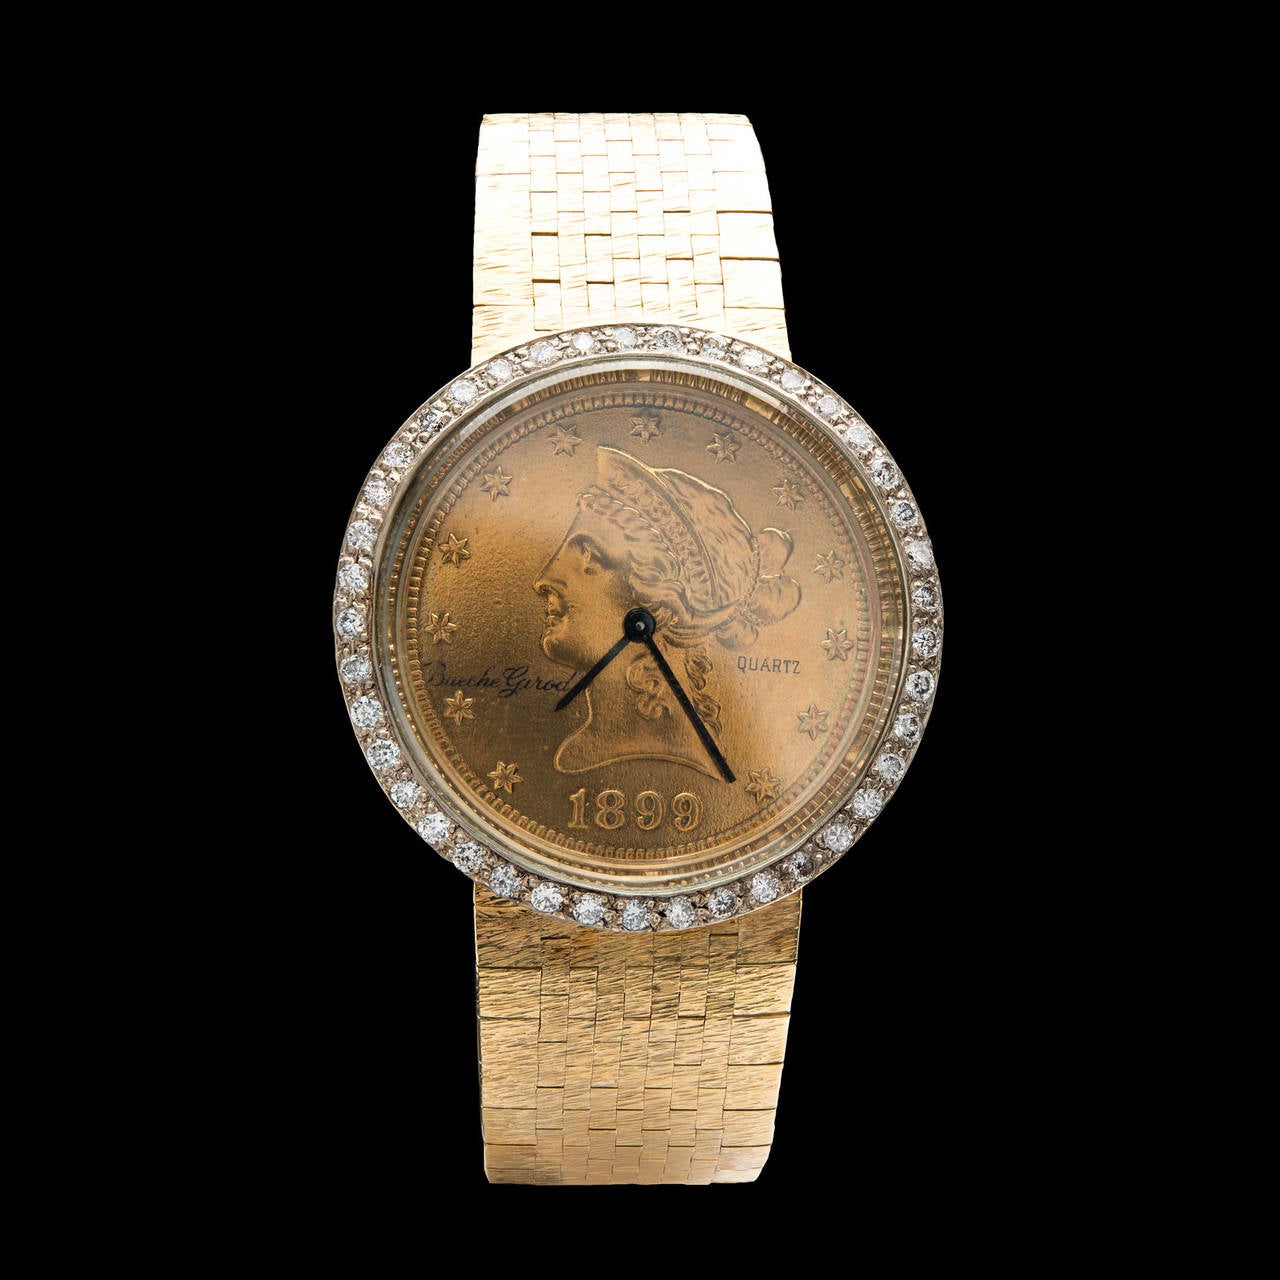 Mid-century 18Kt yellow gold 32mm Bueche Girod wristwatch featuring a $10 US gold coin watch dial. Surrounding the bezel of the watch case are 41 round full-cut diamonds totaling 0.50 carat total weight. The bracelet has two length options at the